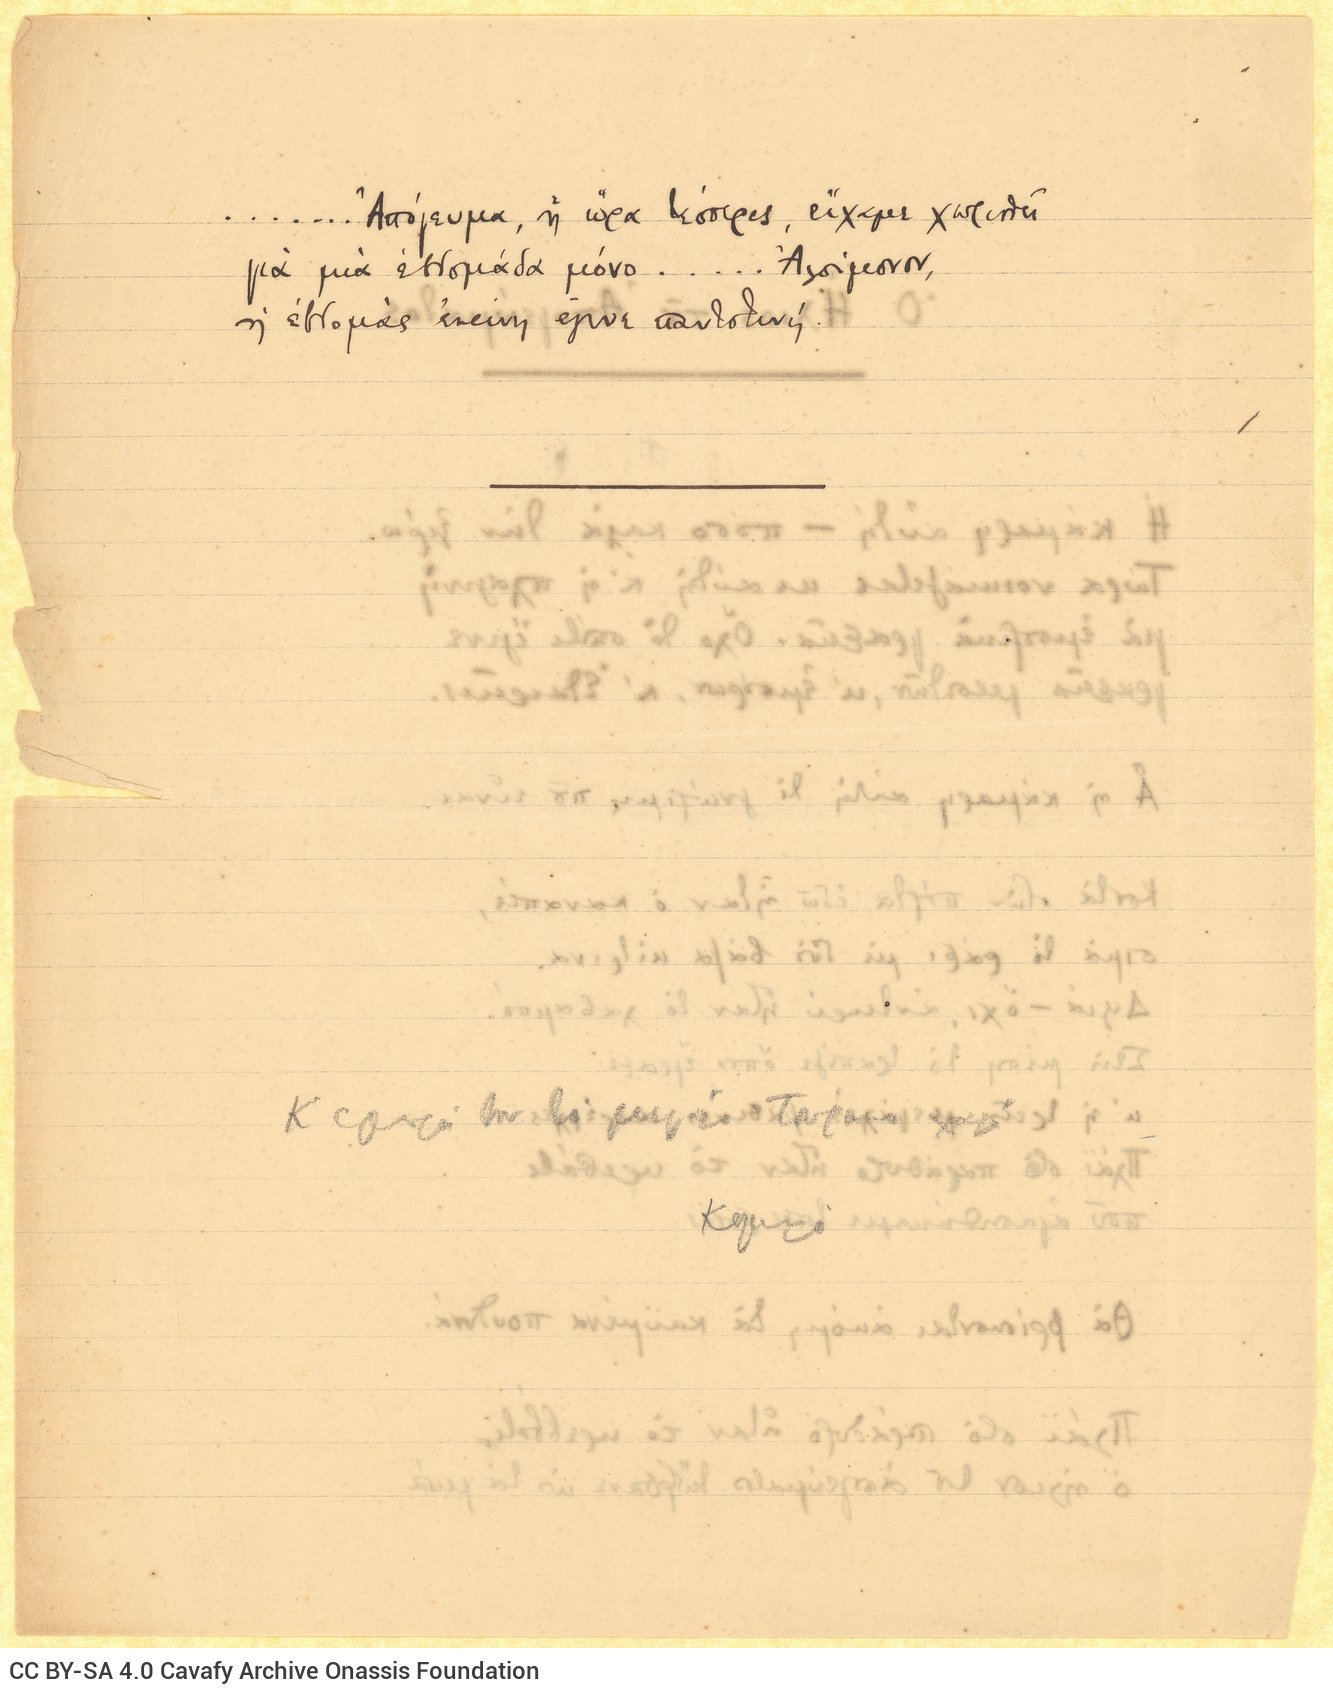 Manuscript of the poem "The Afternoon Sun" on both sides of a ruled sheet. Notes at the bottom of the verso.